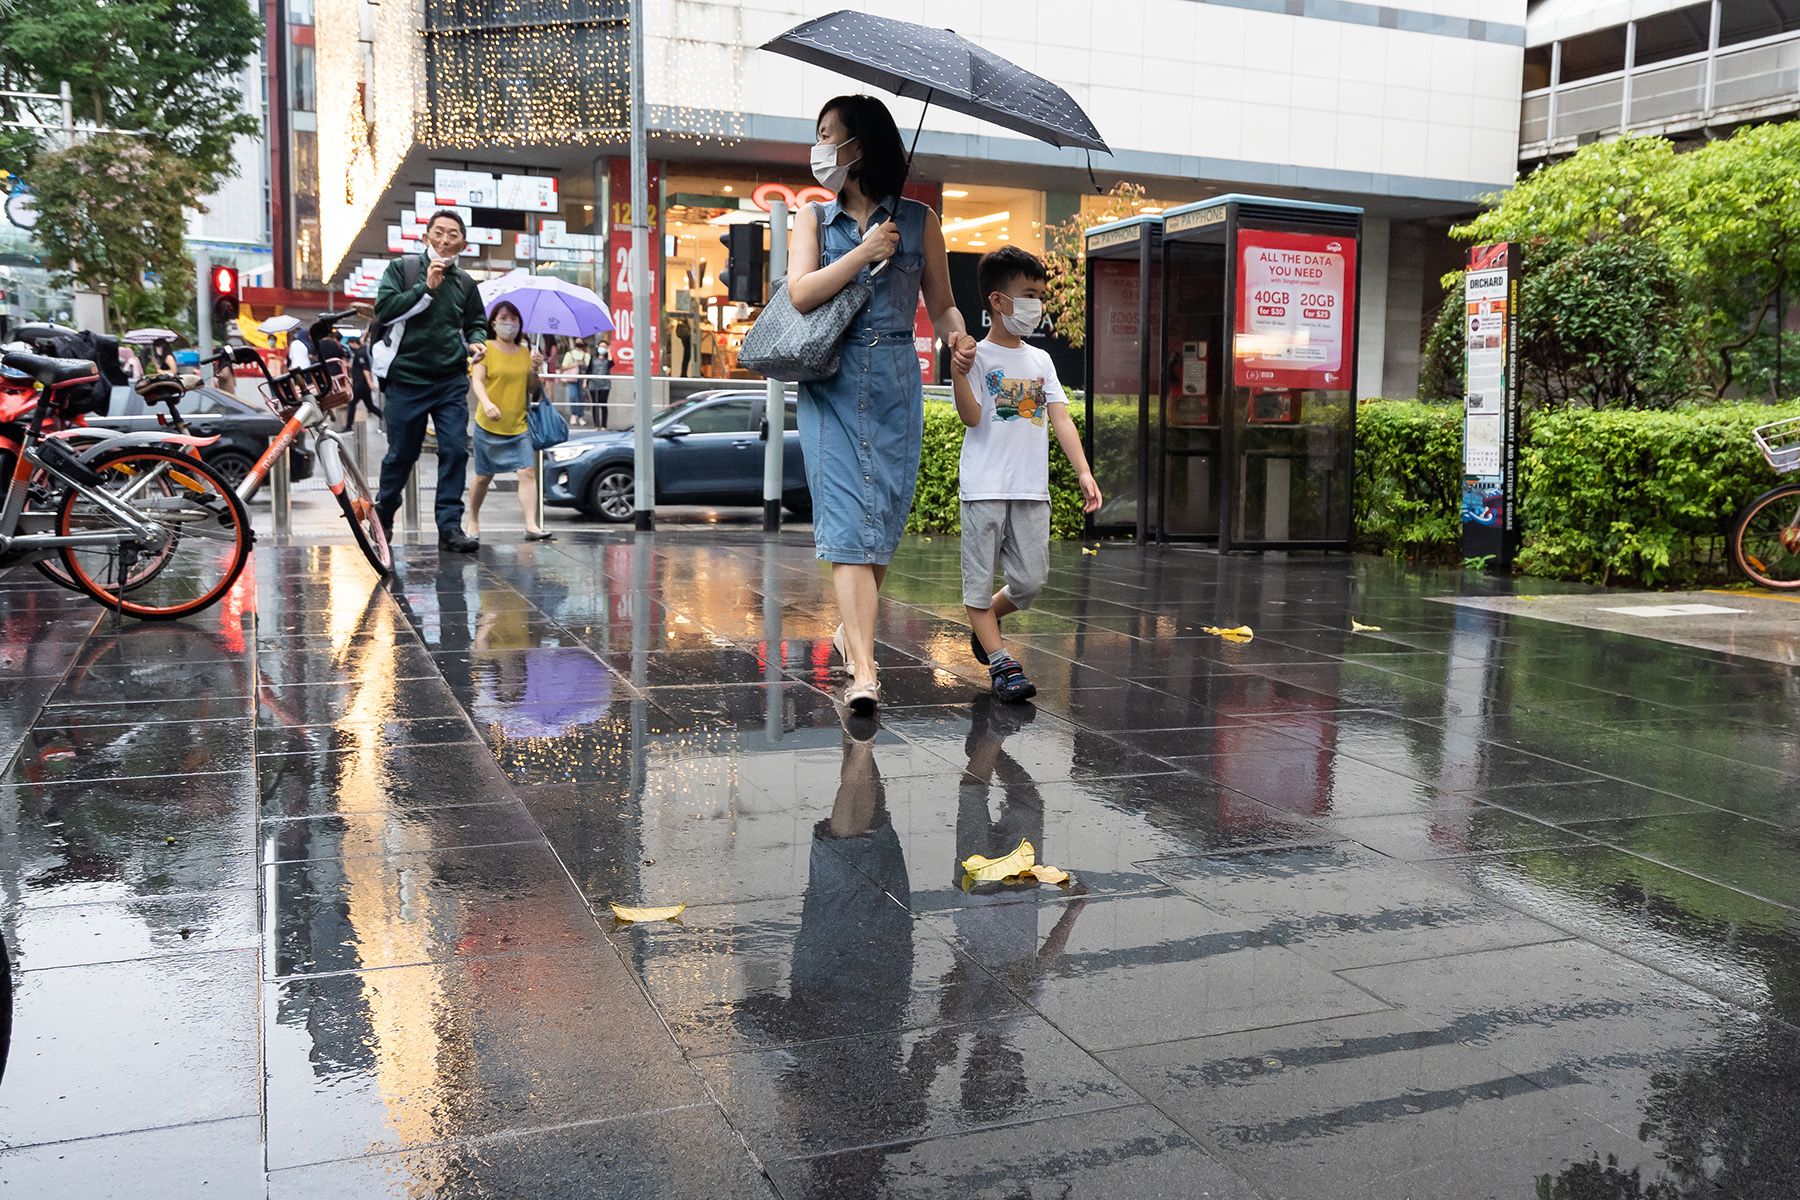 Mom holdd her child's hand while they cross the street, she also hold an umbrella and they are wearing facemasks

